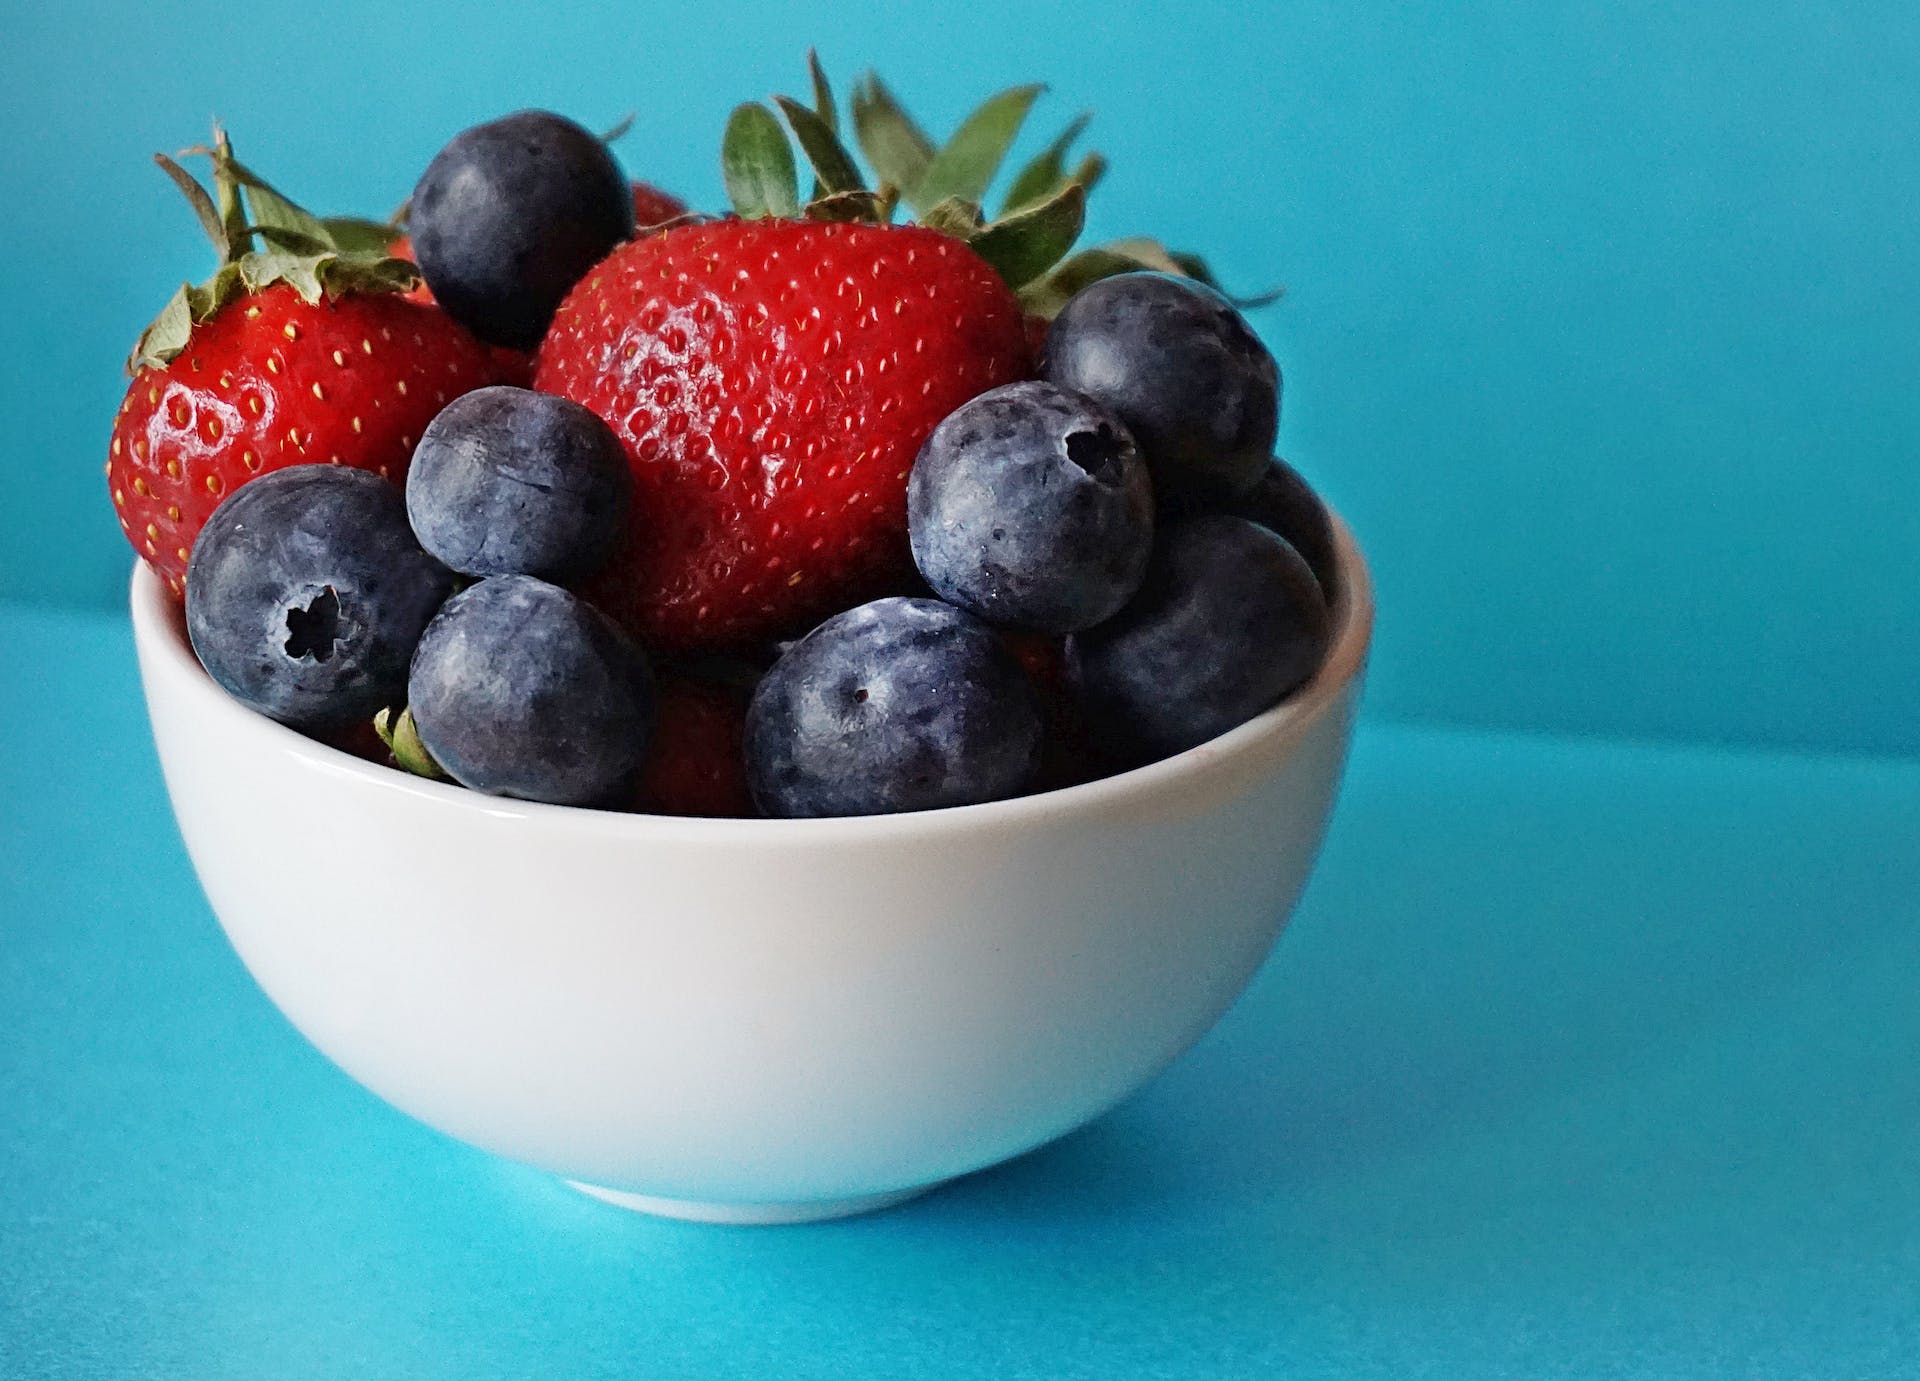 Strawberries and blueberries in a bowl.